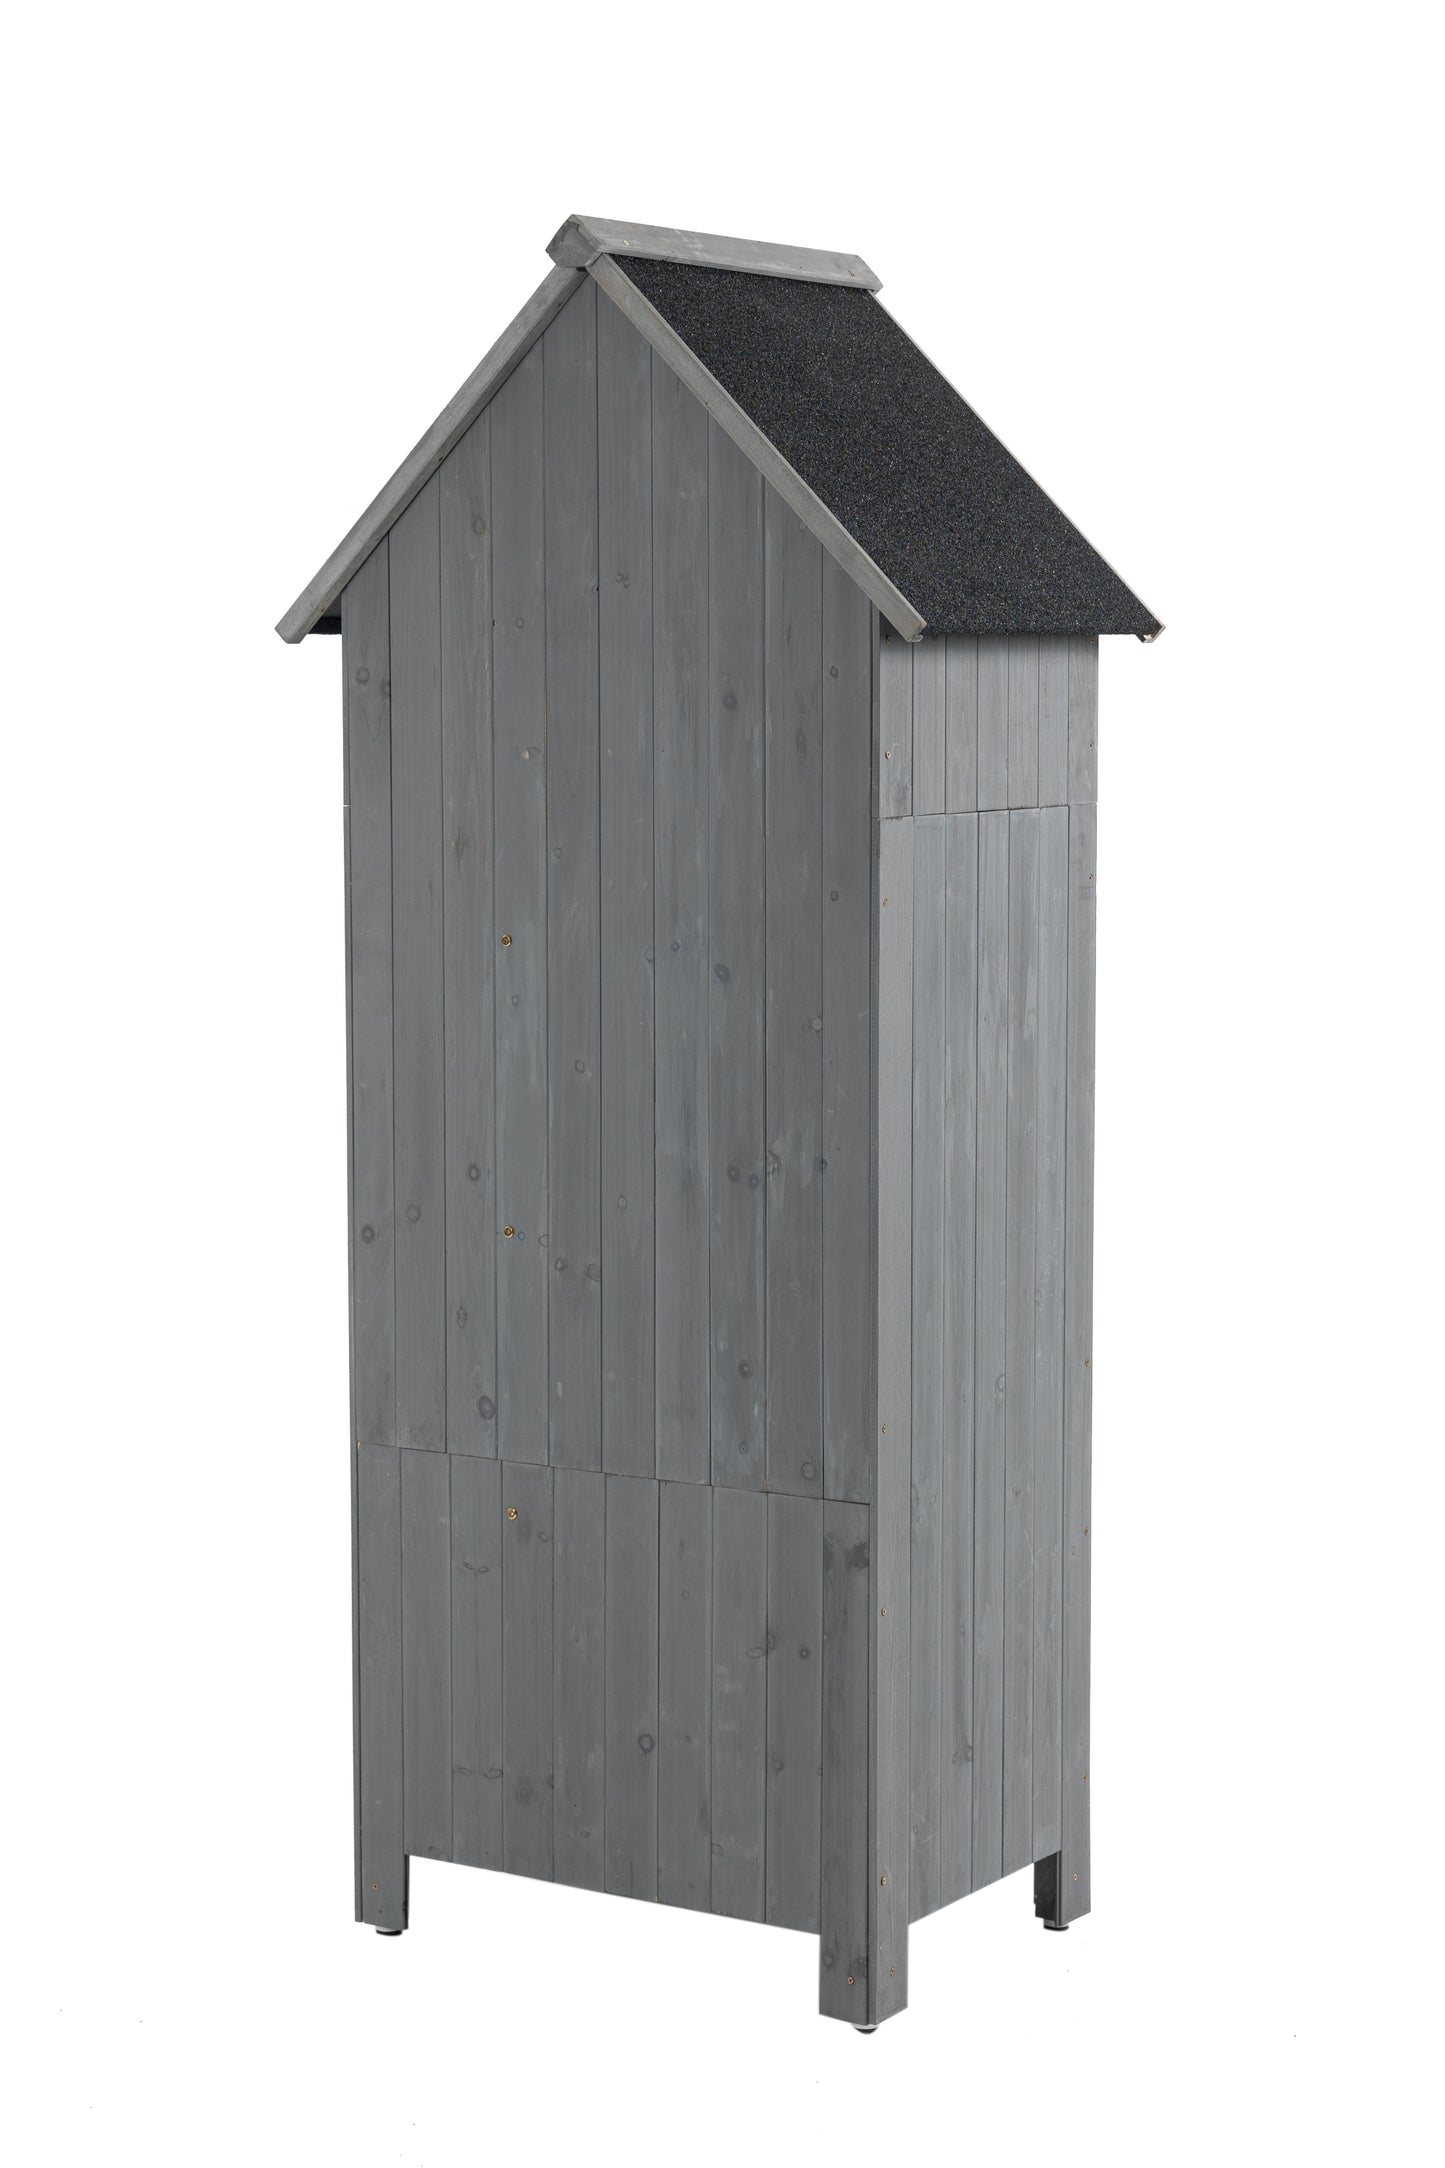 30.3”L X 21.3”W X 70.5”H Outdoor Storage Cabinet Tool Shed Wooden Garden Shed  Gray